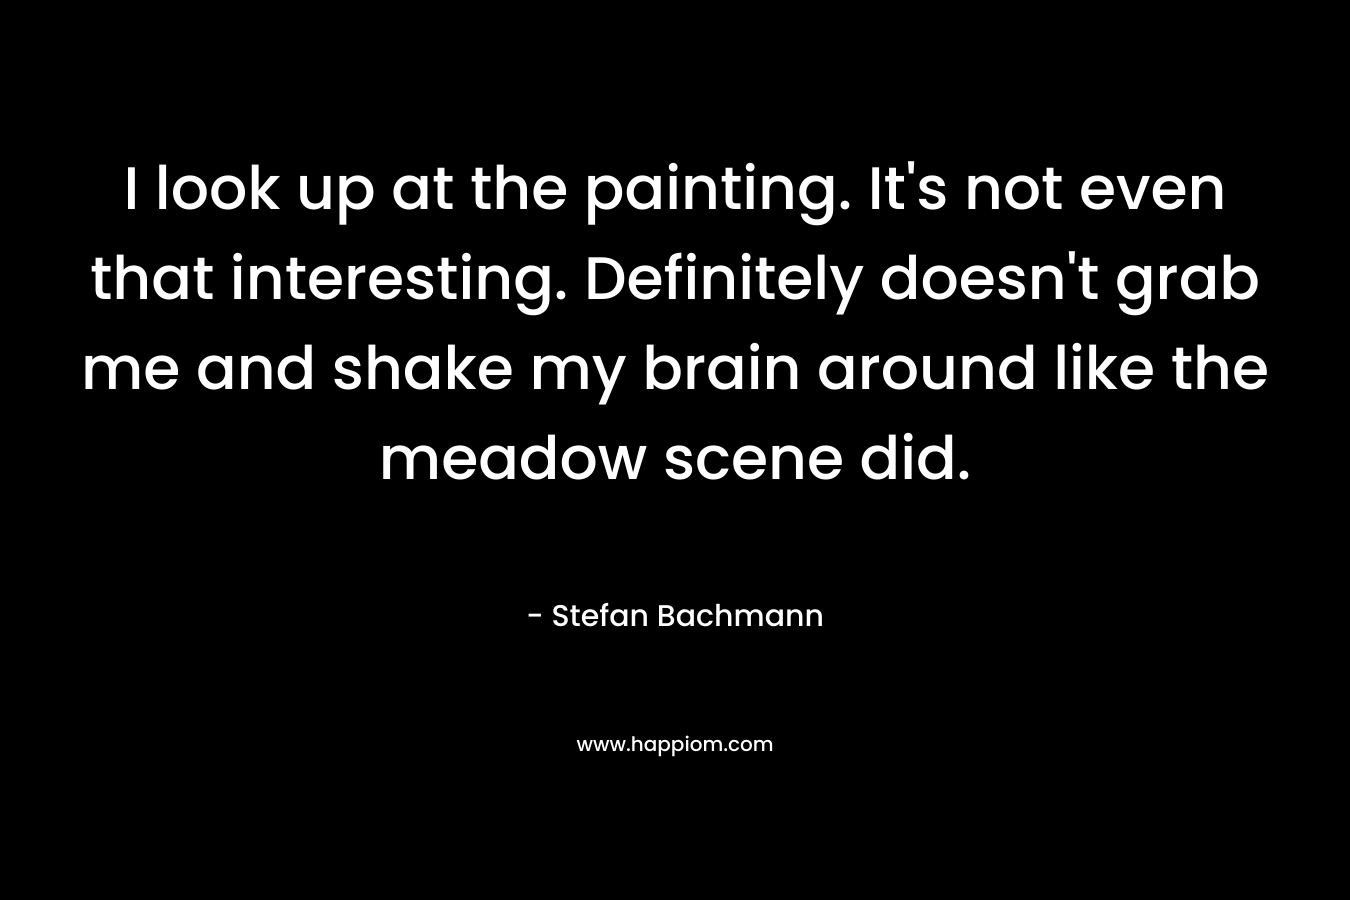 I look up at the painting. It’s not even that interesting. Definitely doesn’t grab me and shake my brain around like the meadow scene did. – Stefan Bachmann